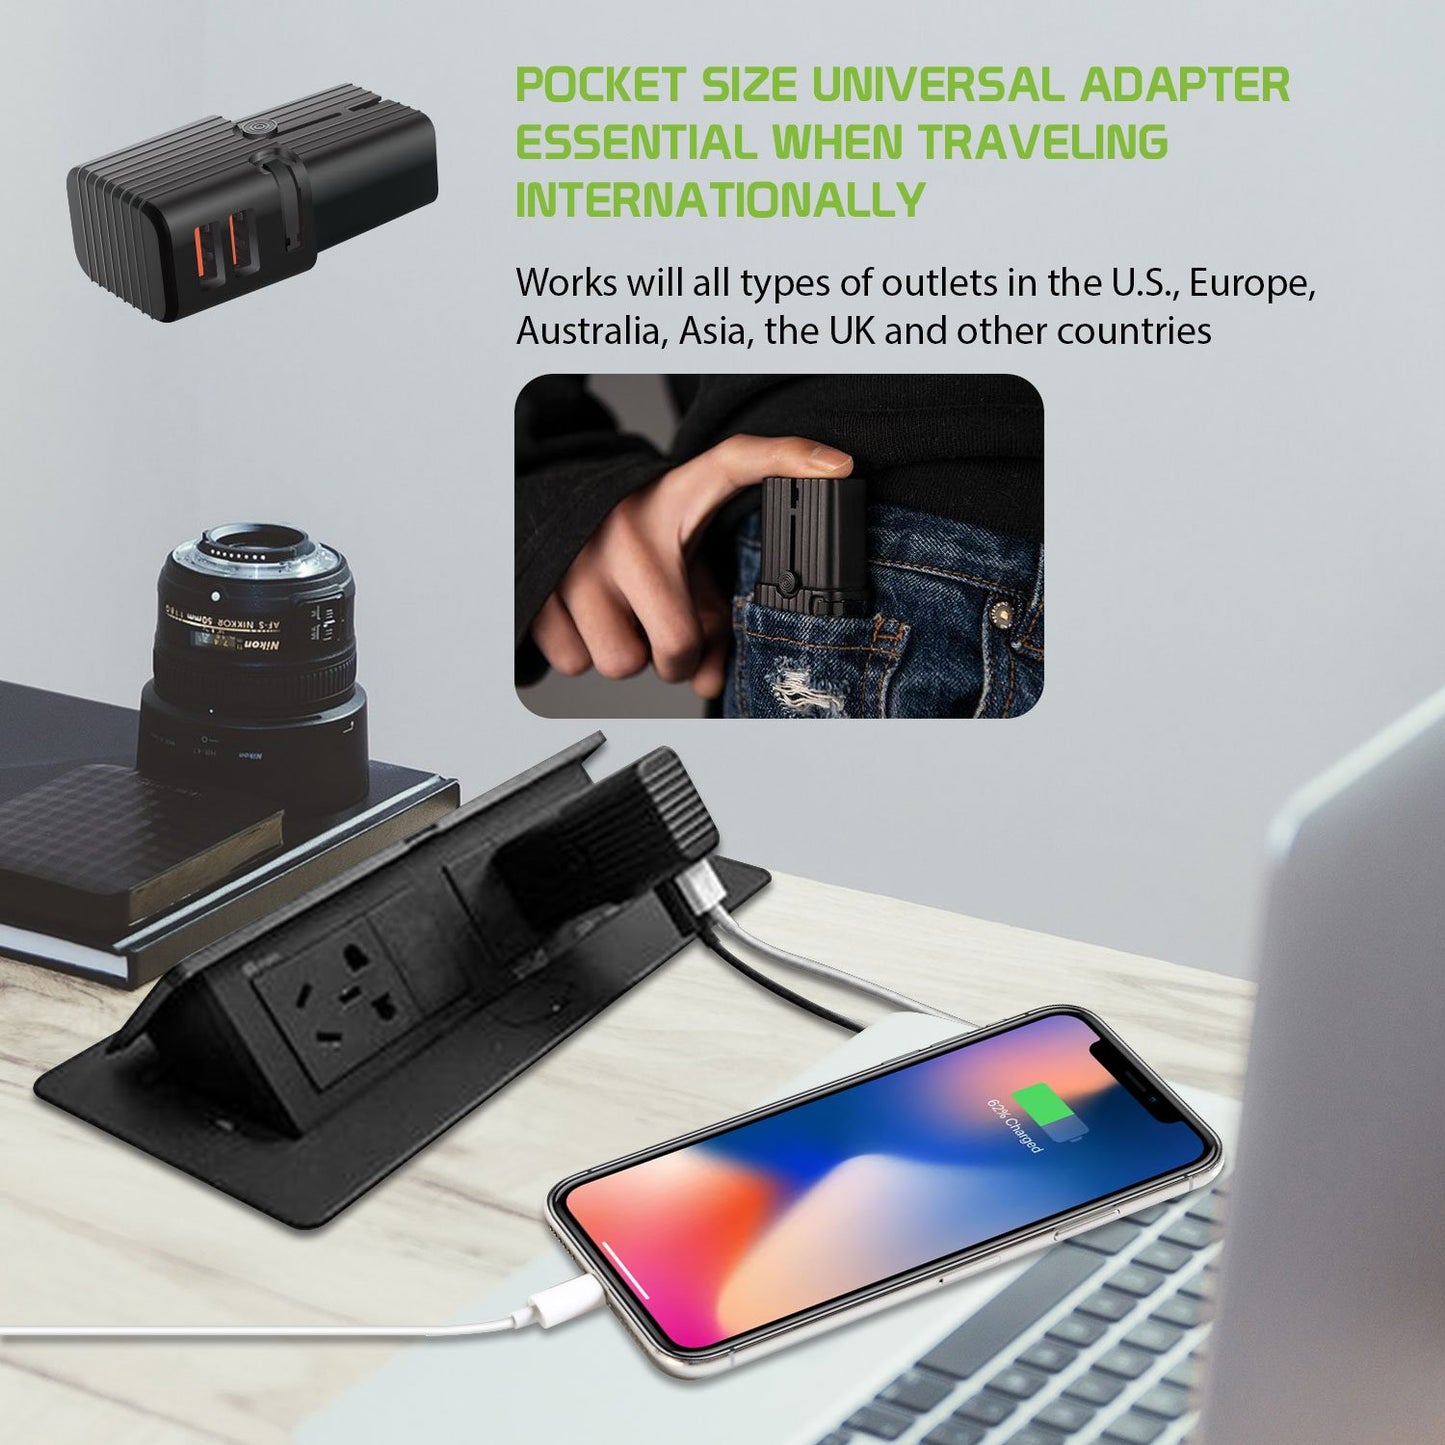 TCU2000 - Universal Pocket Size Power Adapter with Dual USB Ports compatible to iPads, Tablets, Laptops, Power banks, smartphones and other devices